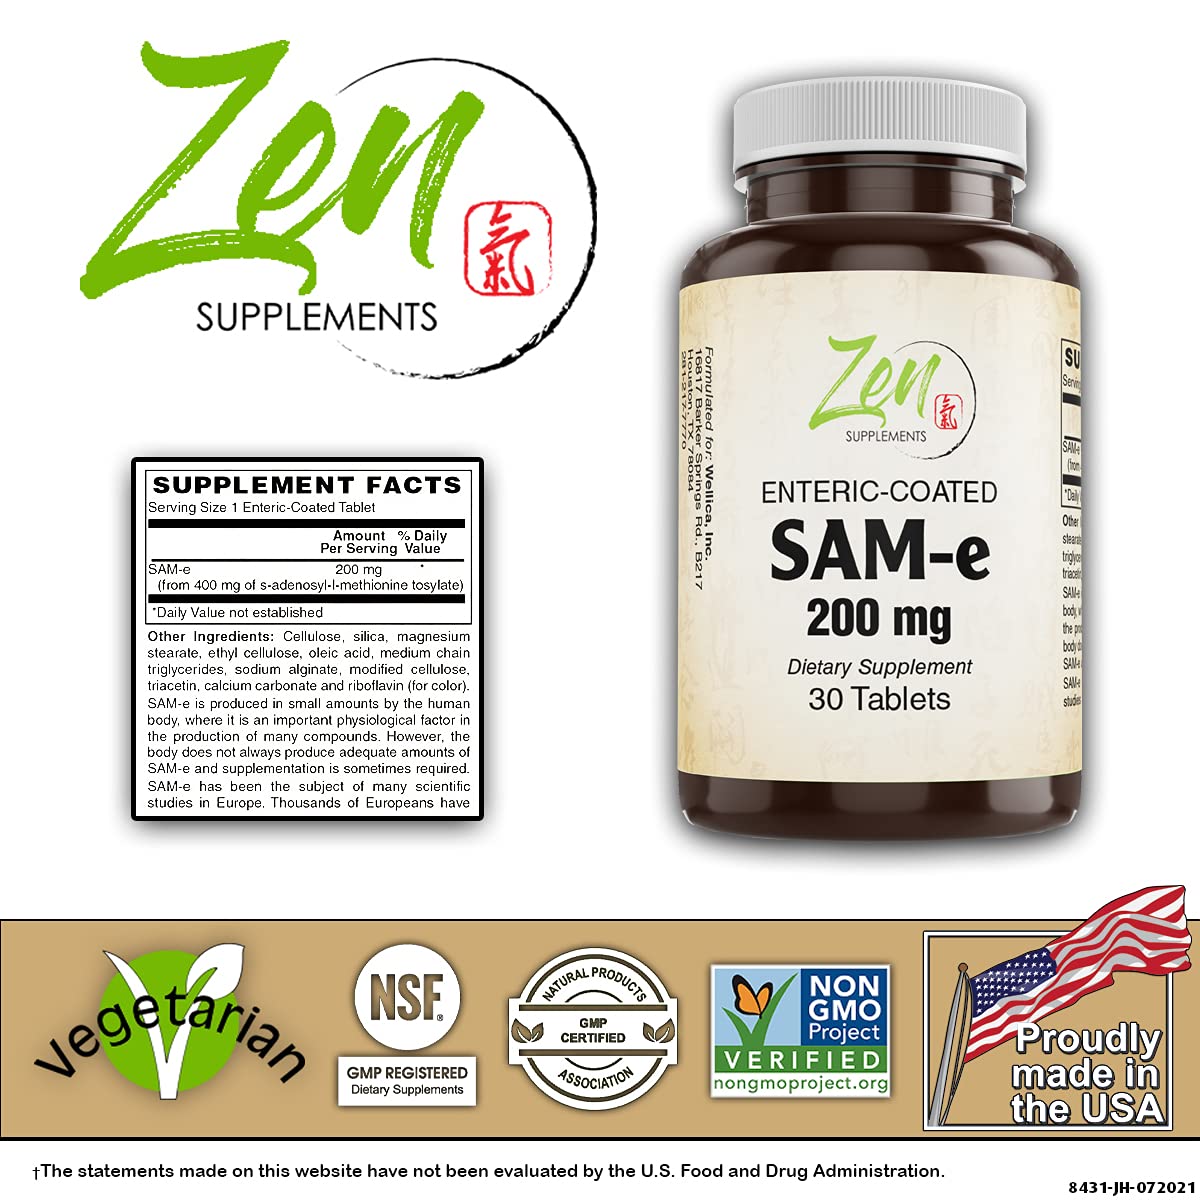 Zen Supplements - SAM-E 200 Mg - Promotes Positive Mood & Brain Function and Joint Comfort & Strength. (S-Adenosyl-L-Methionine) Nervous System Support 30-Tabs